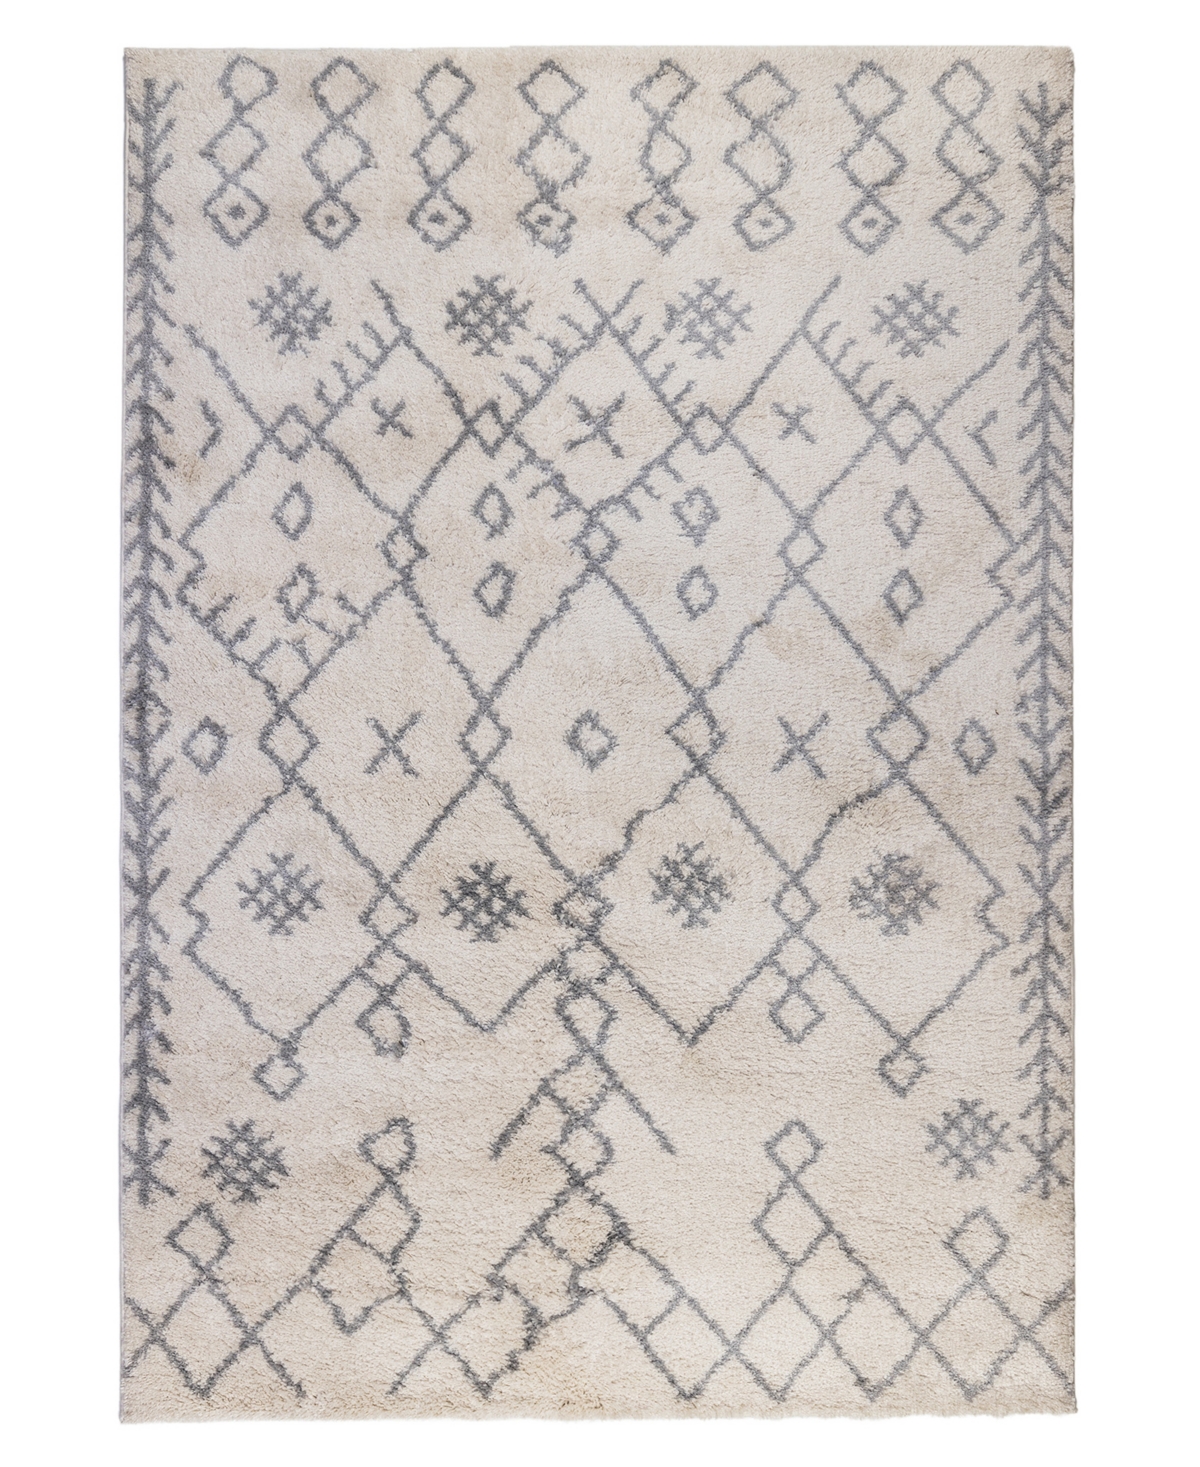 Amer Rugs Asp6 5' X 7'6" Area Rug In Ivory/gray